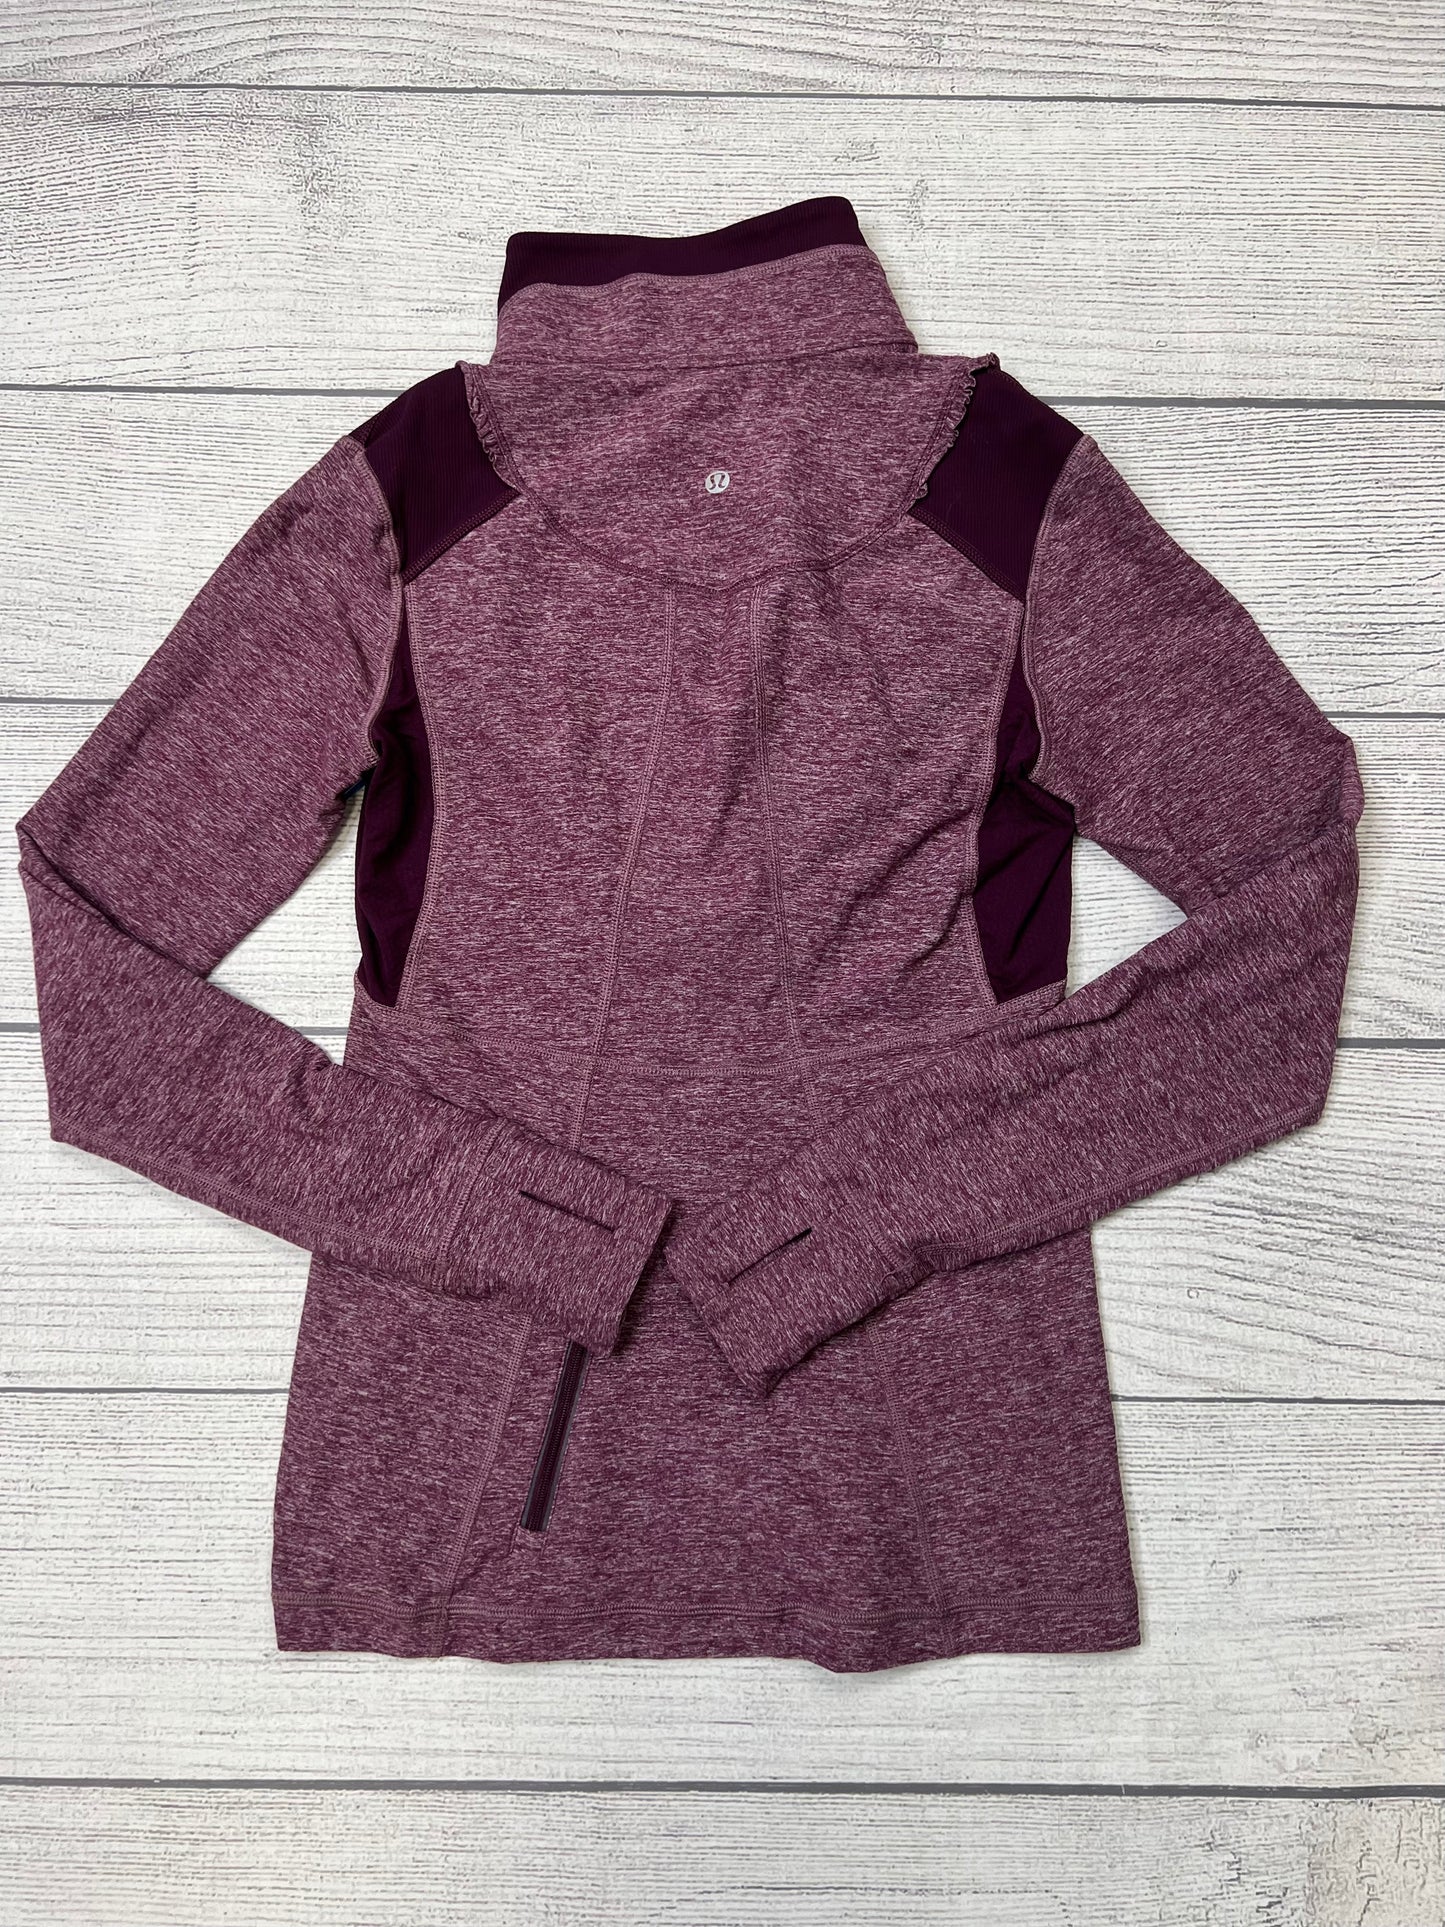 Athletic 1/2 Zip Pullover Jacket By Lululemon  Size: S